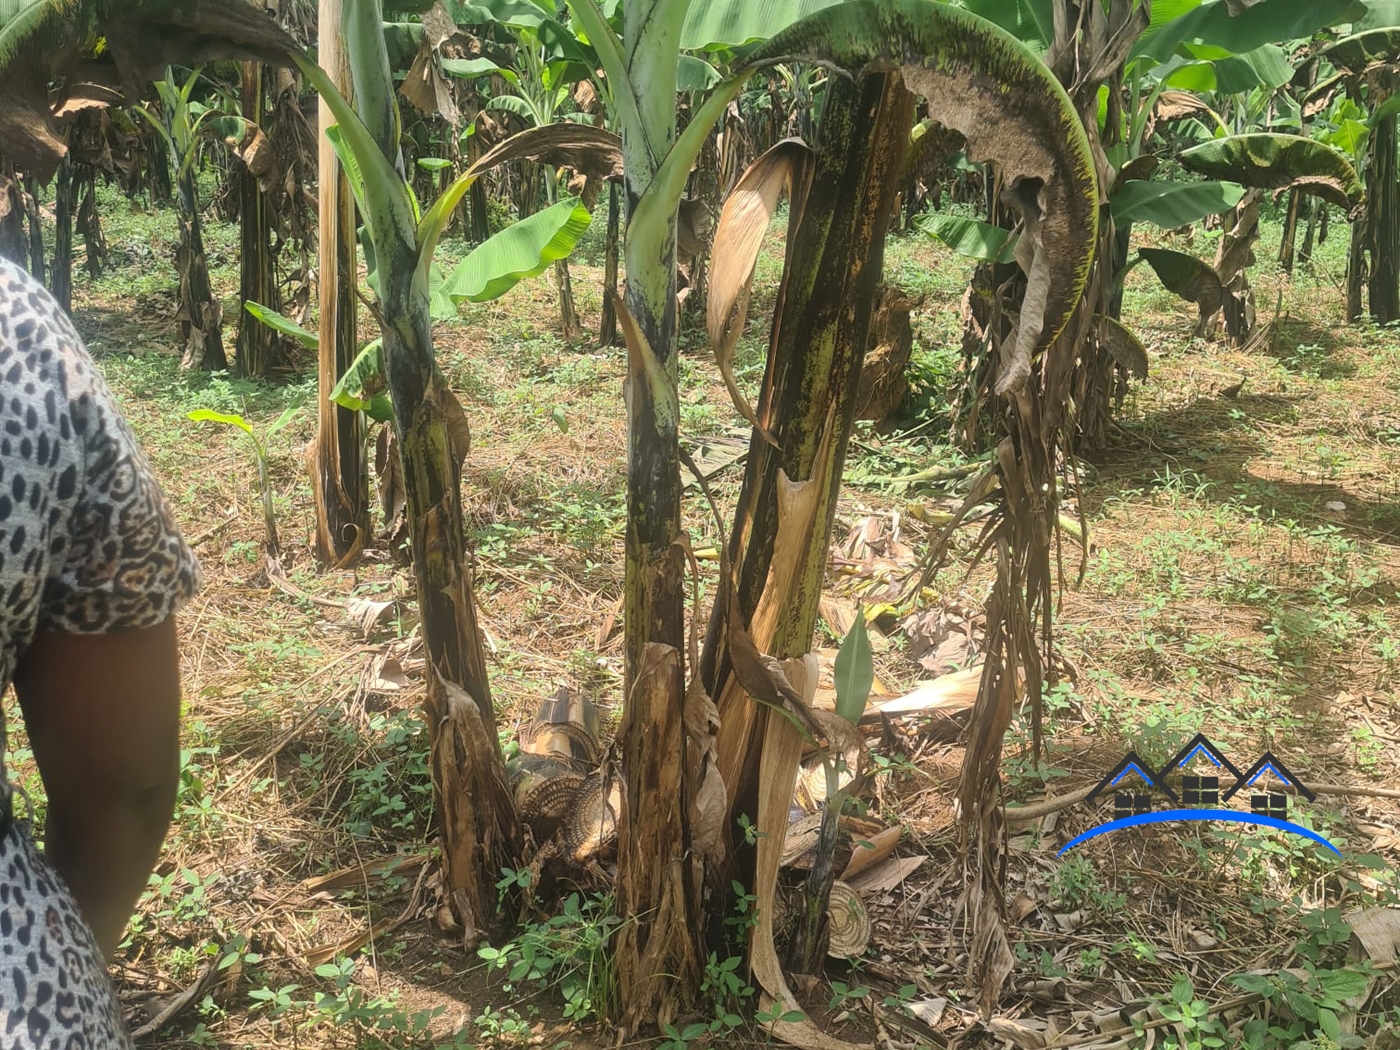 Agricultural Land for sale in Gayaza Wakiso